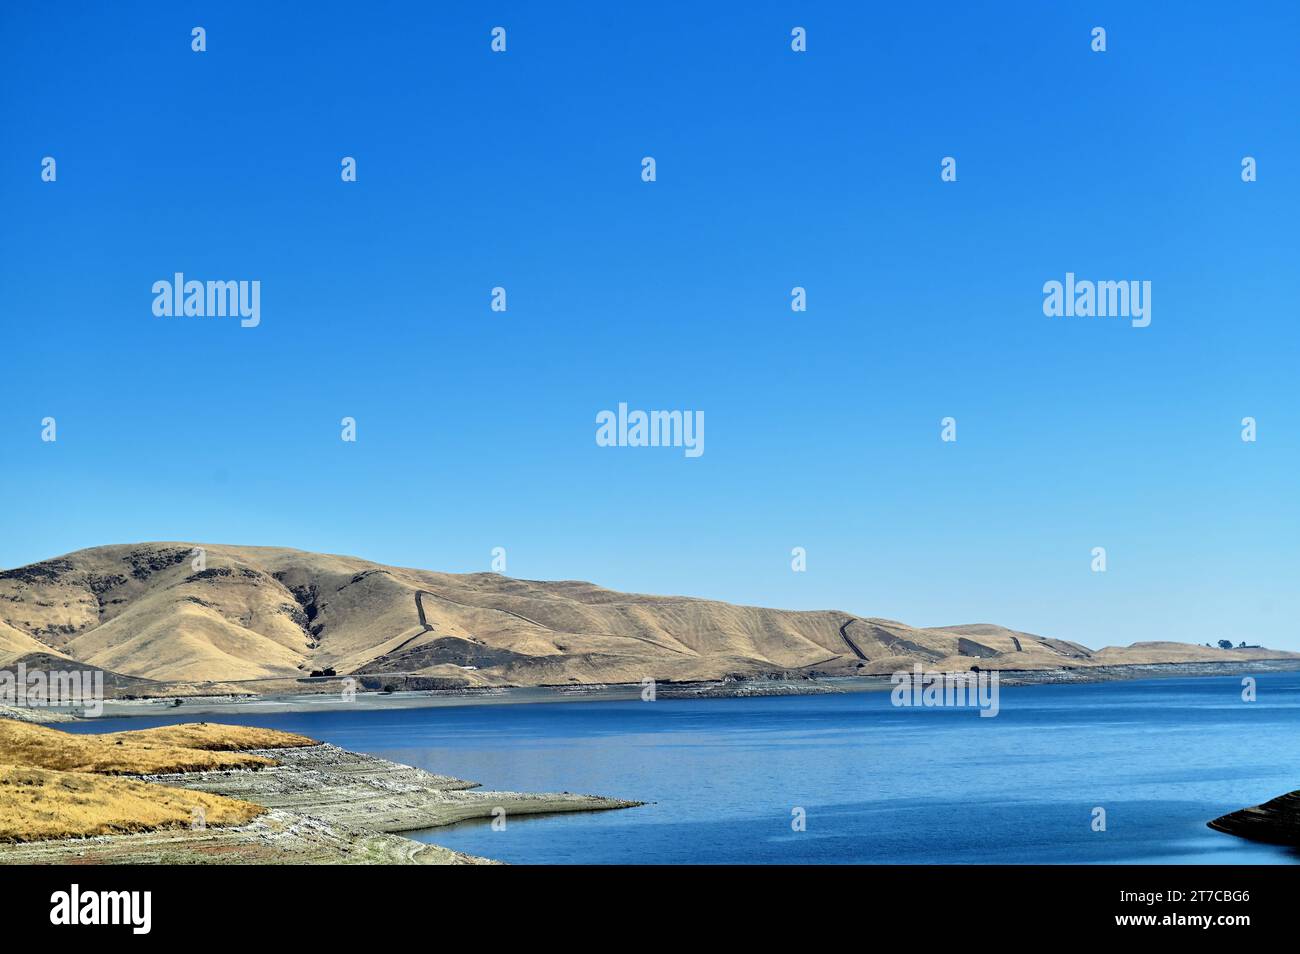 Hollister, California, USA. The San Luis Reservoir, a man-made lake in the San Joaquin Valley. Stock Photo